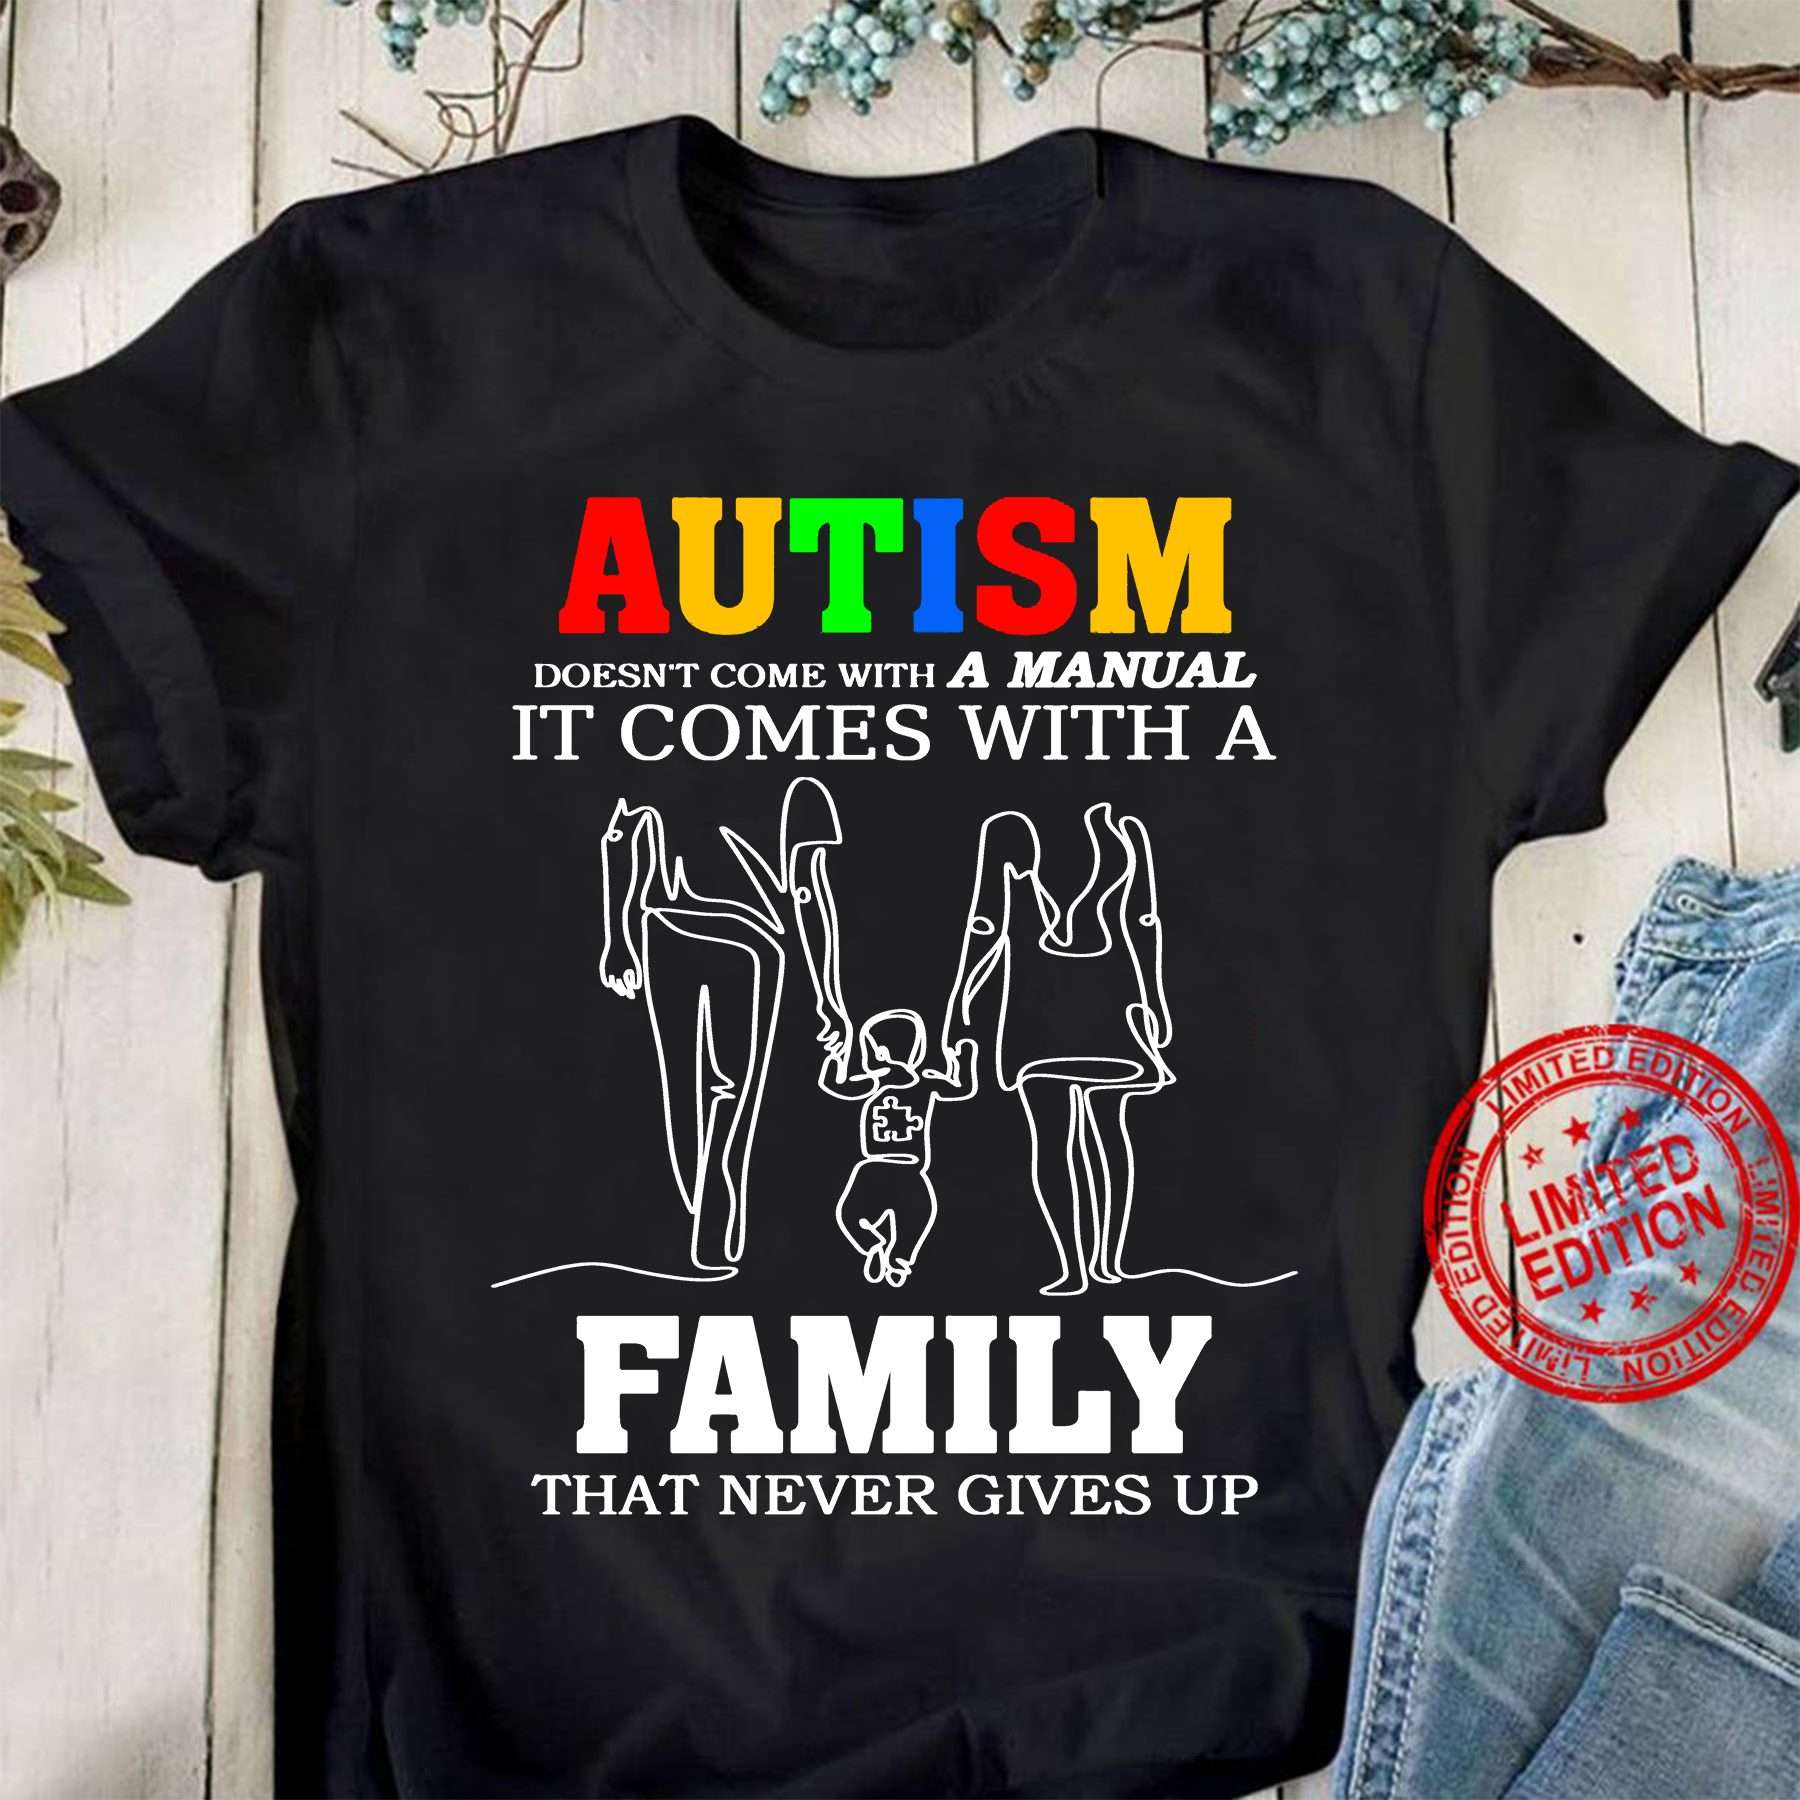 Autism doesn't come with a manual it comes with a family that never gives up